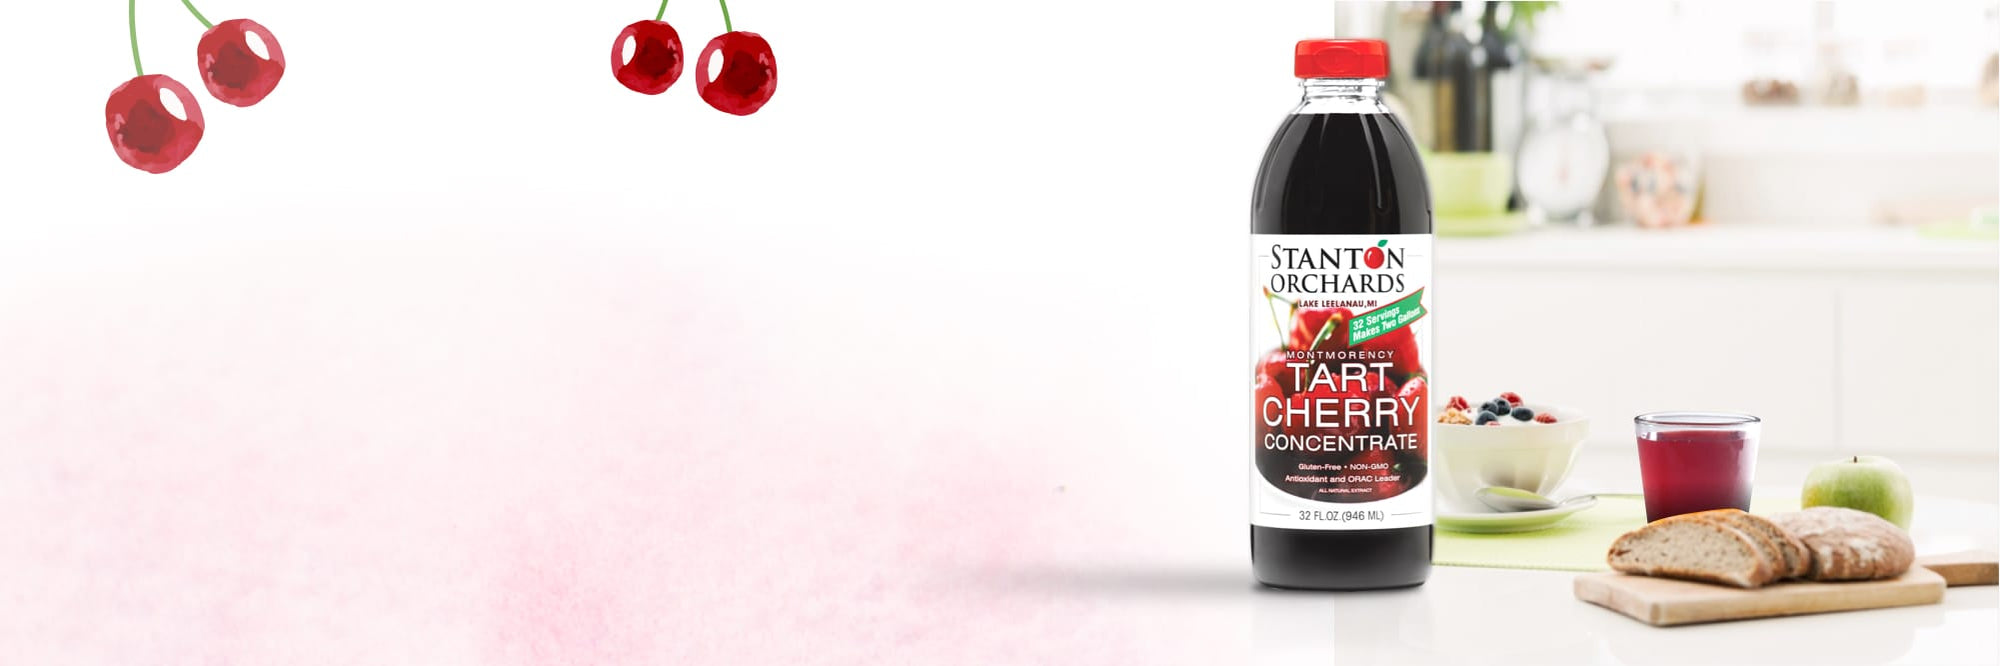 Stanton Orchards' tart cherry concentrate removes free radicals inside the body to help deter cancer